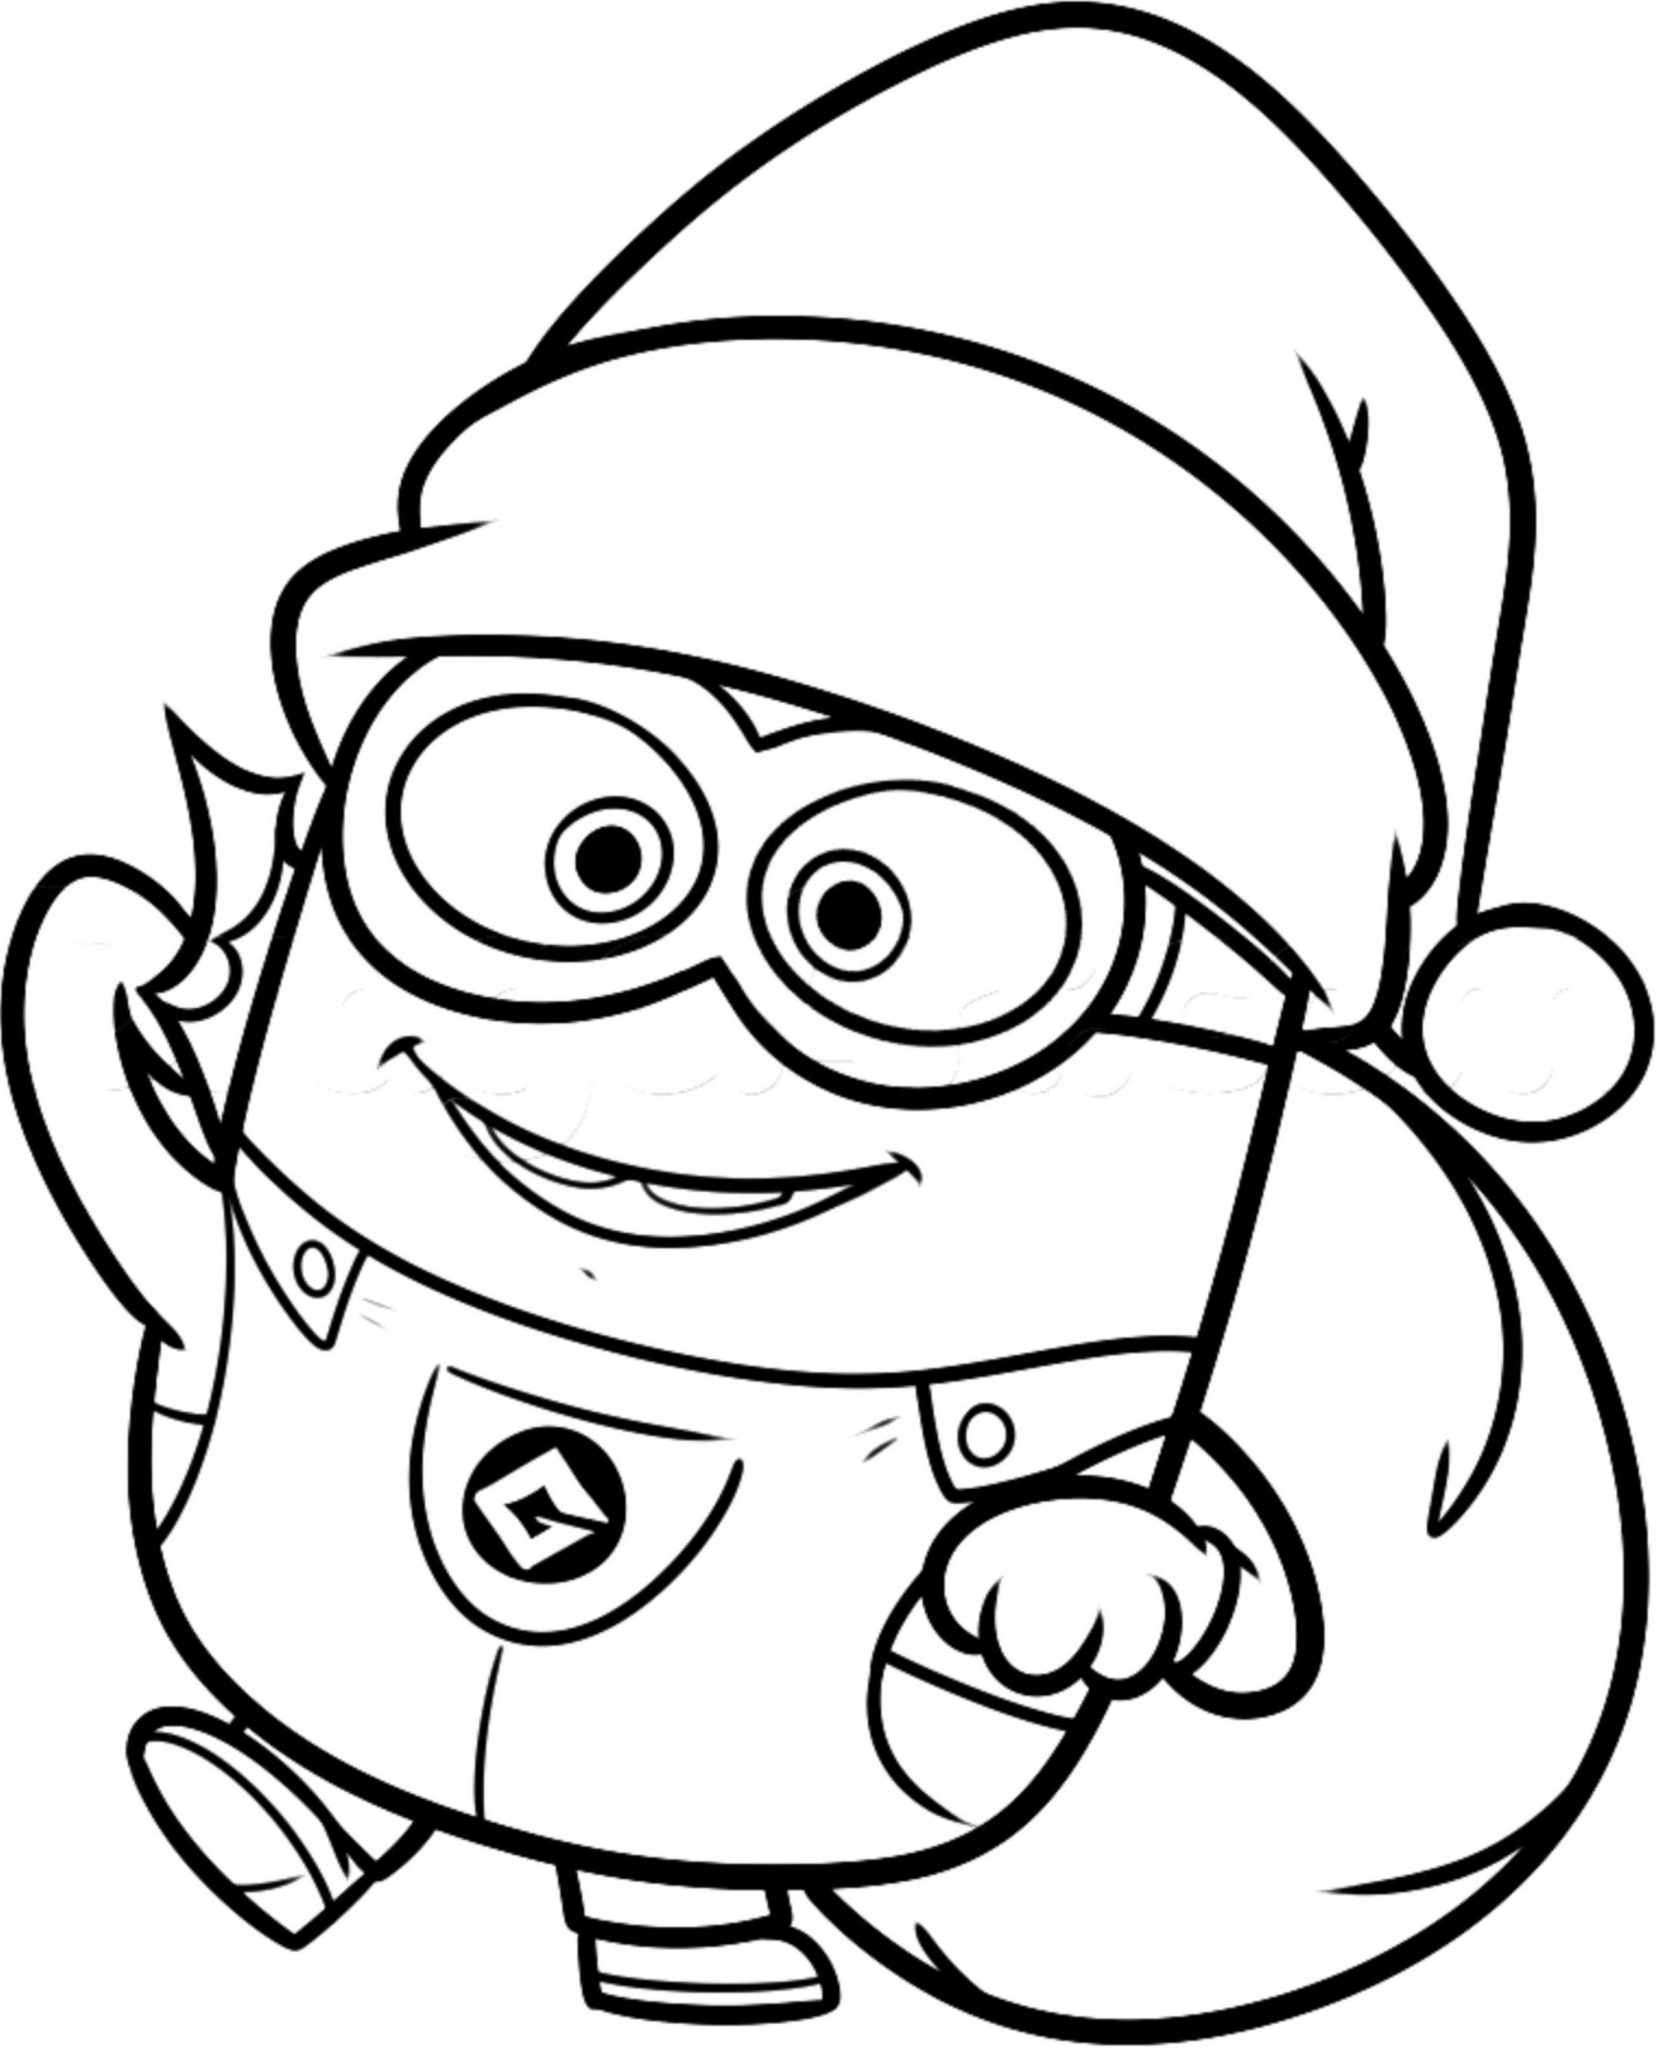 christmas-minions-coloring-pages BestAppsForKids.com